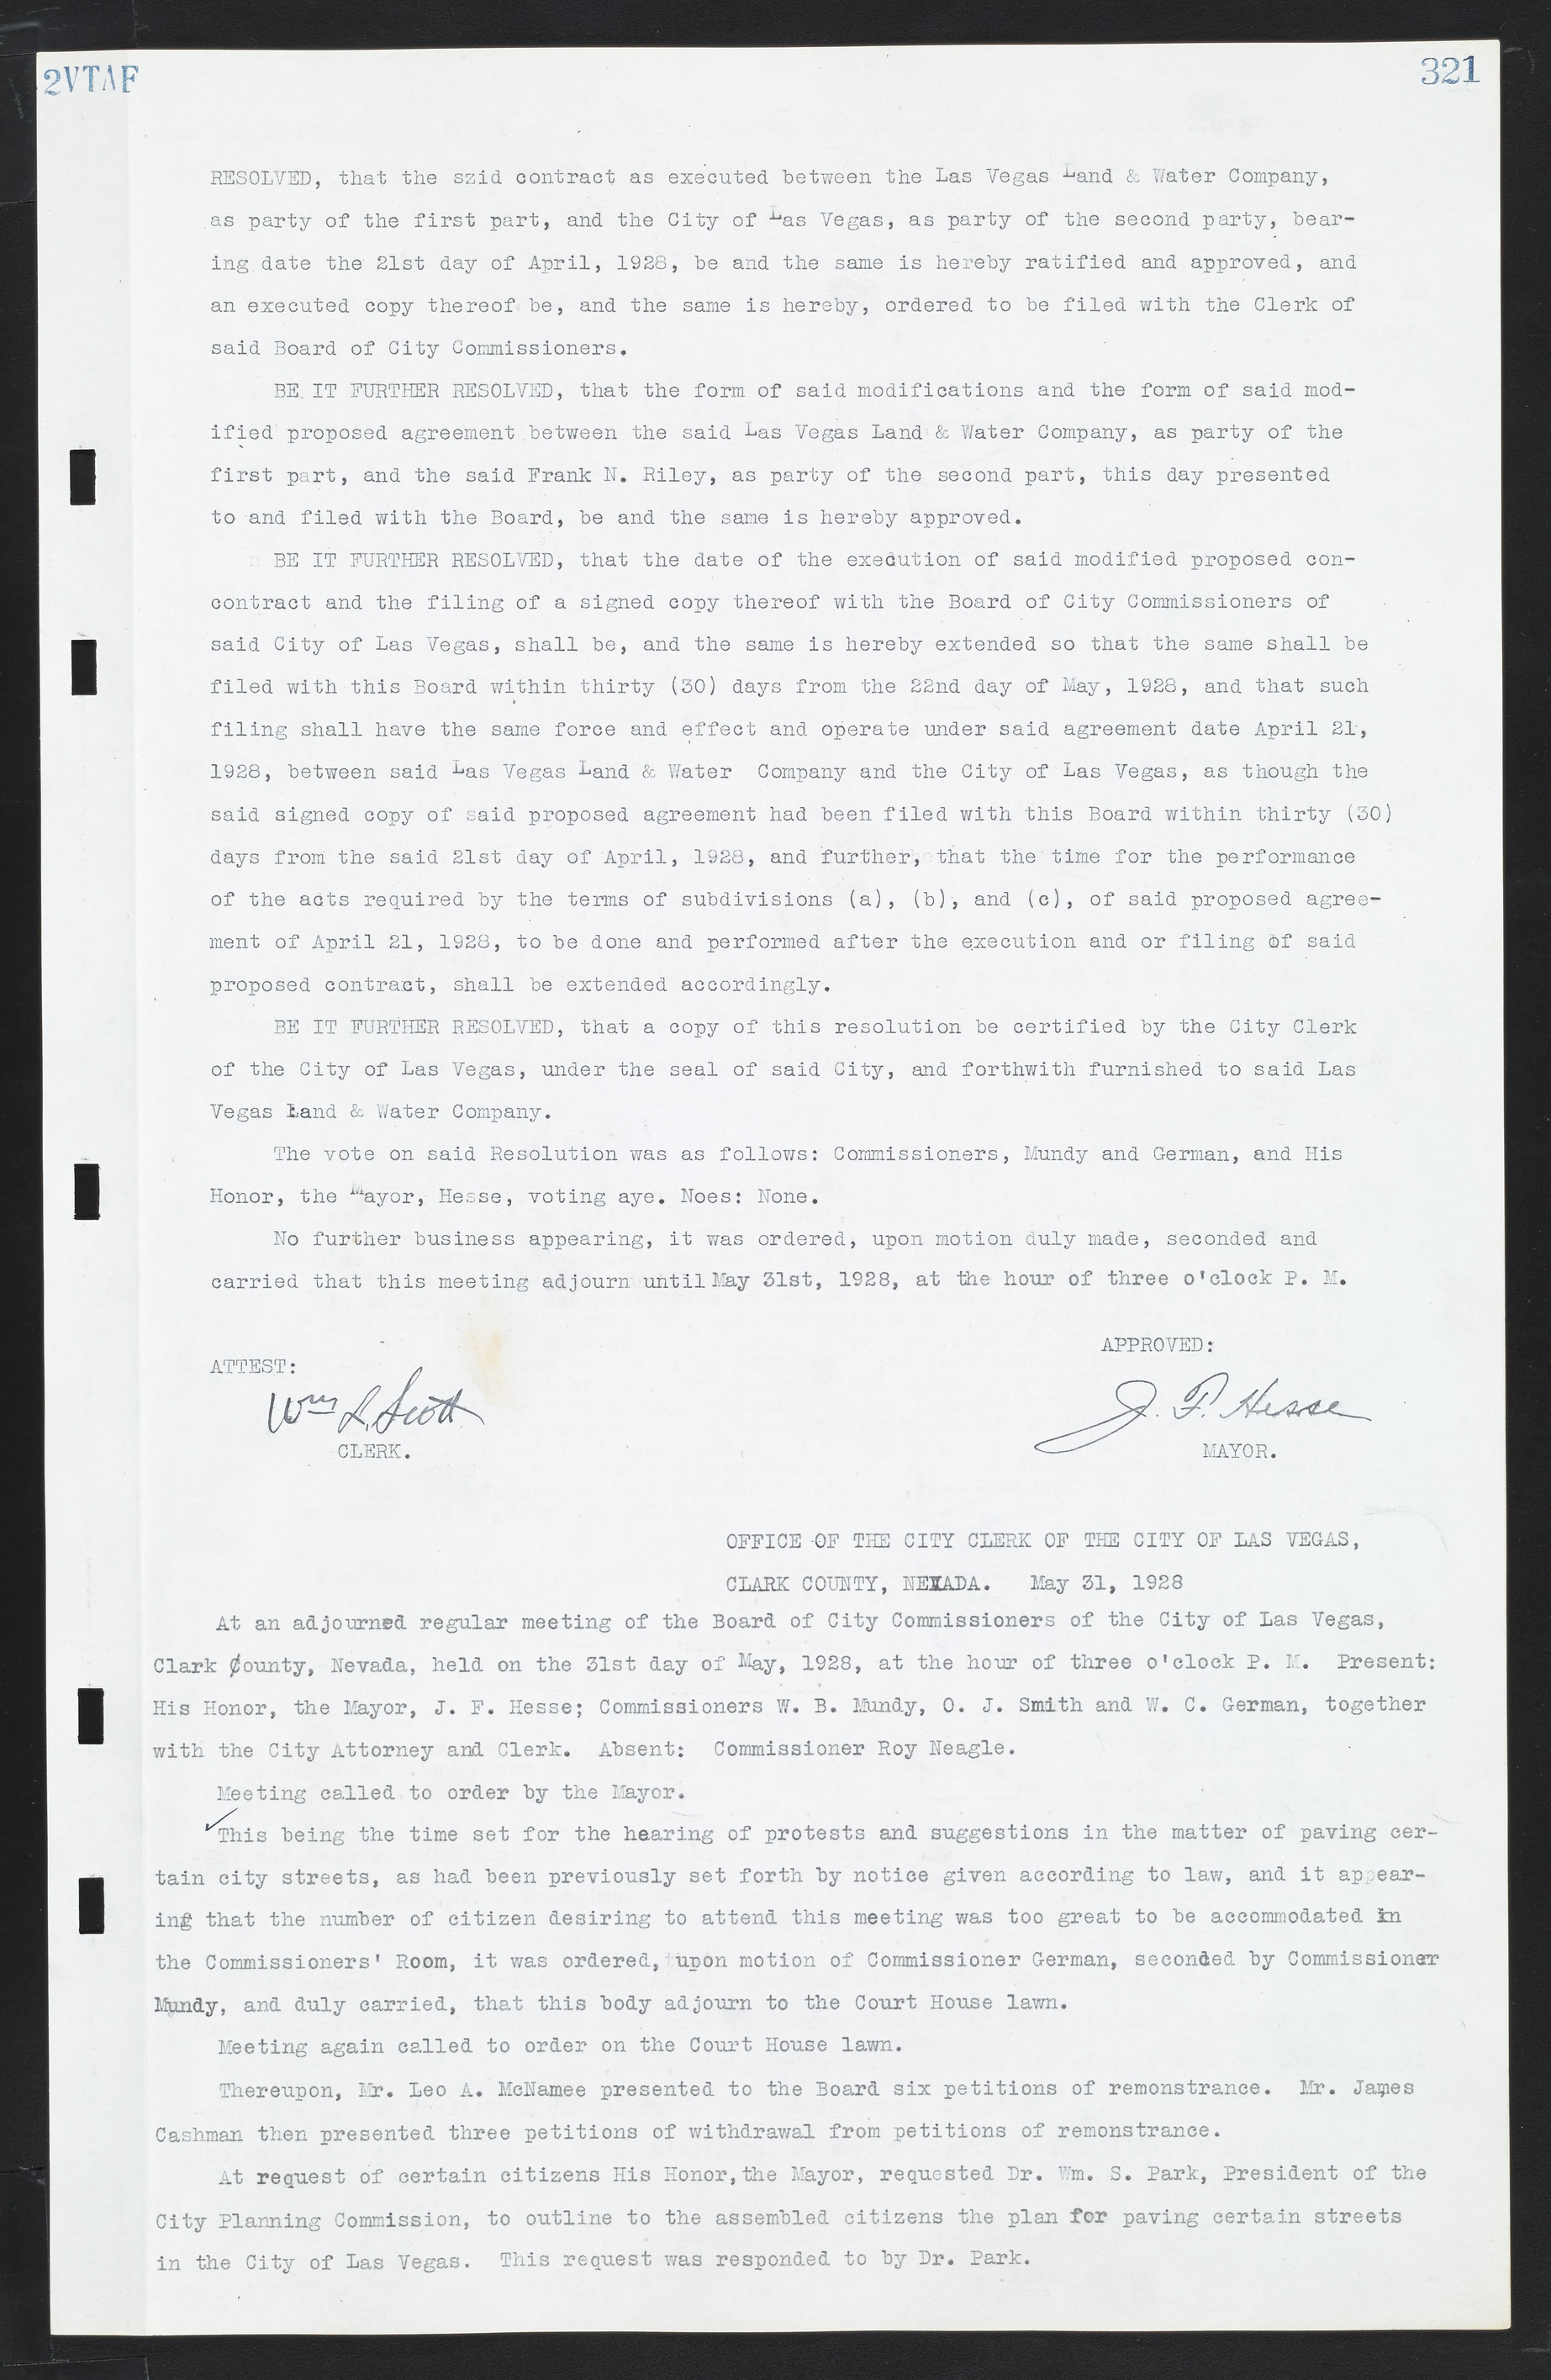 Las Vegas City Commission Minutes, March 1, 1922 to May 10, 1929, lvc000002-330